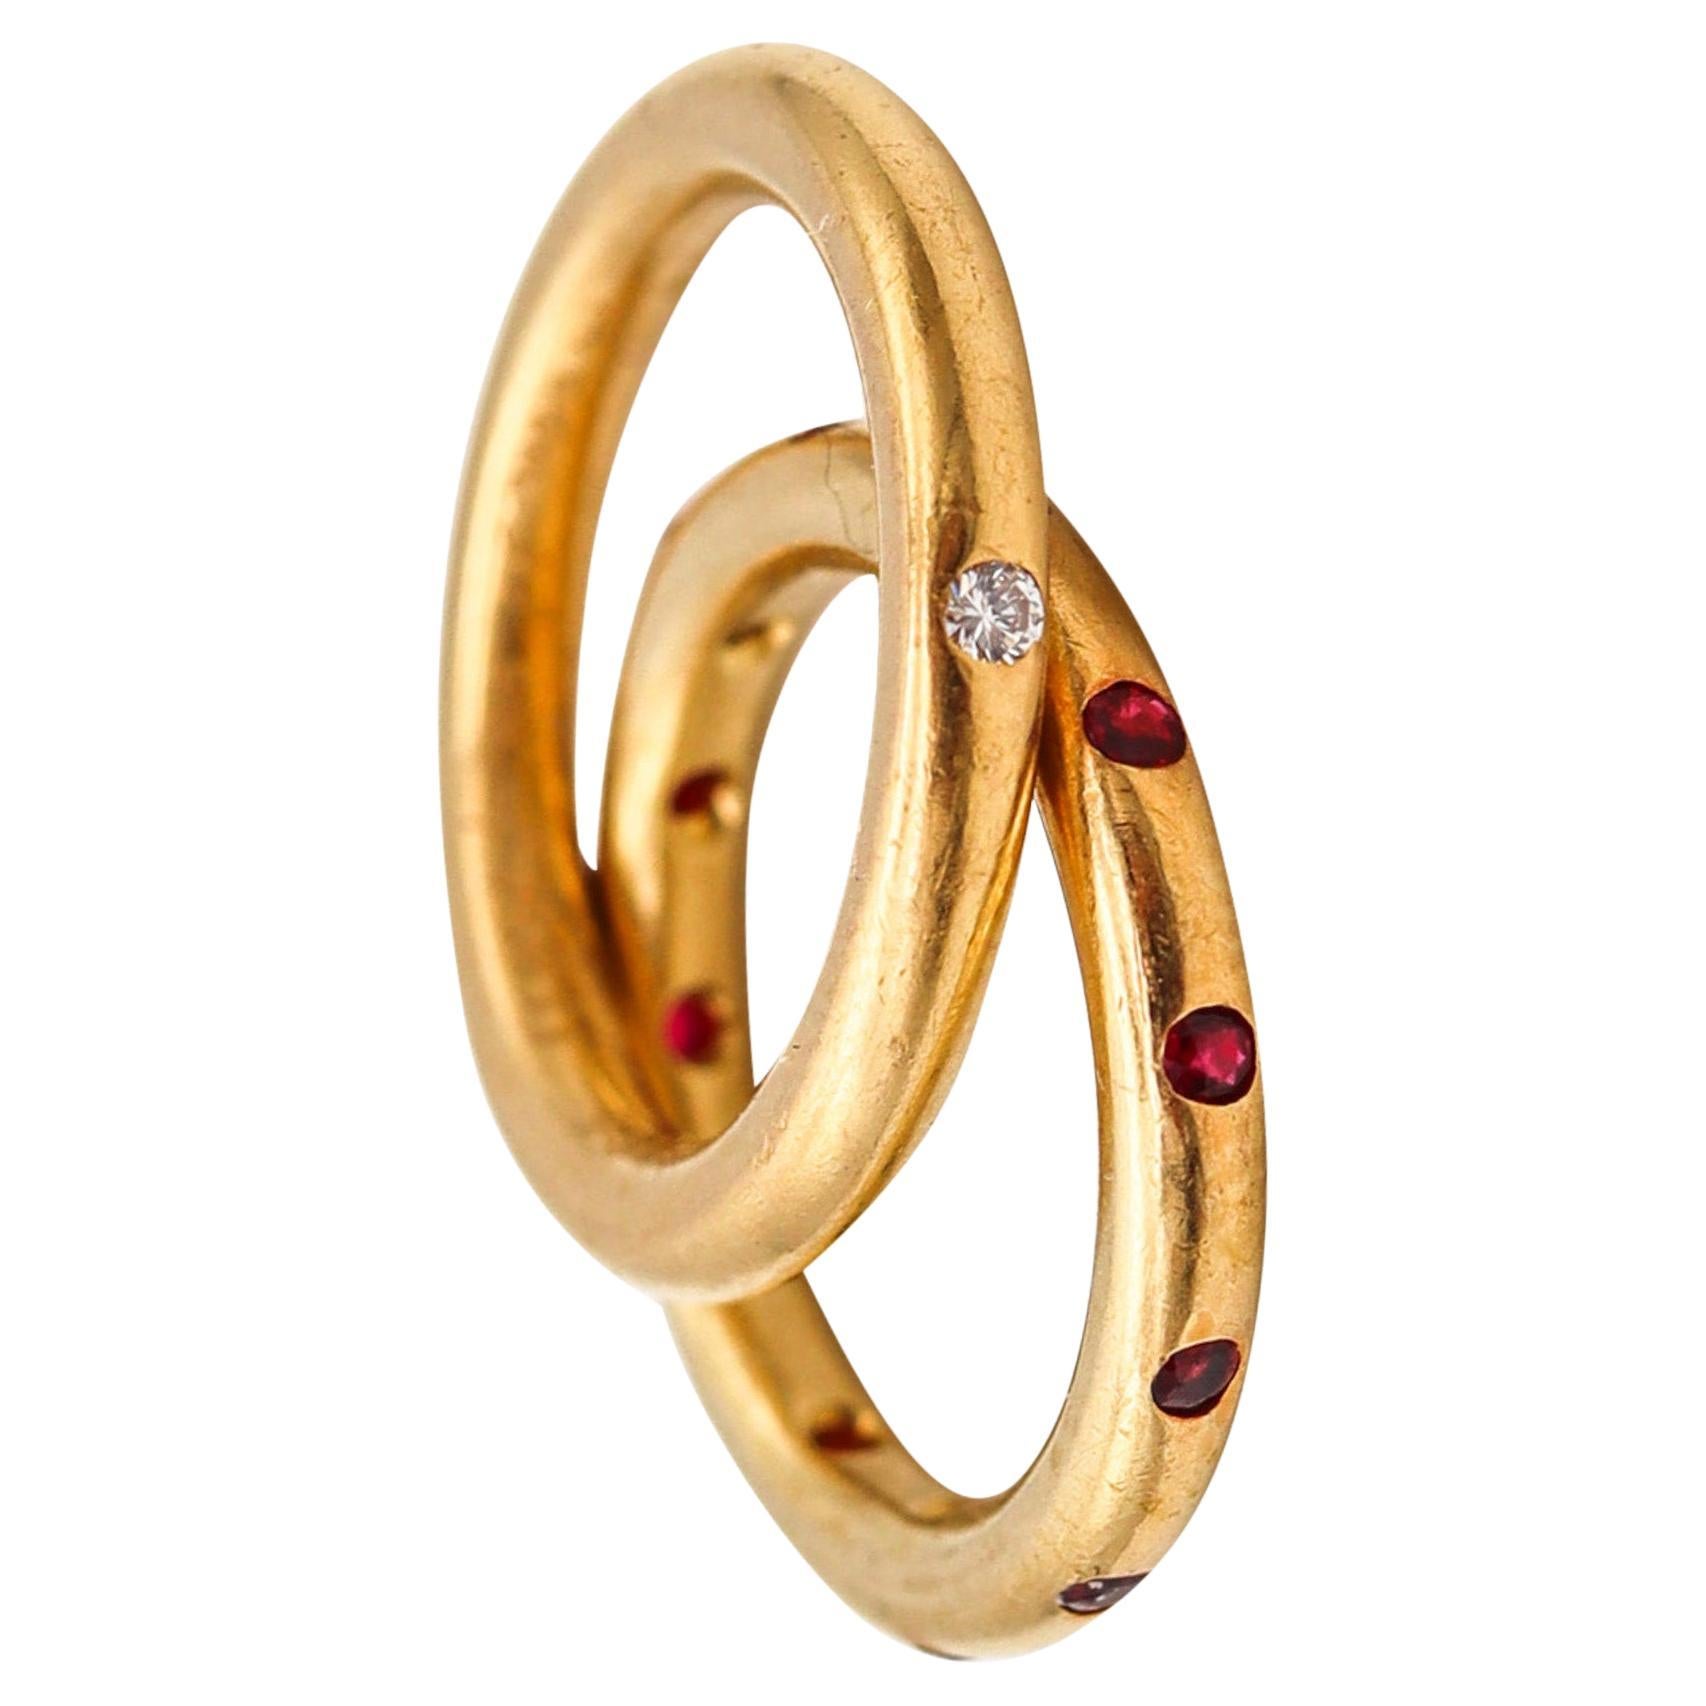 Reinstein Ross Stackable Duo Rings In 22Kt Yellow Gold With Rubies and a Diamond